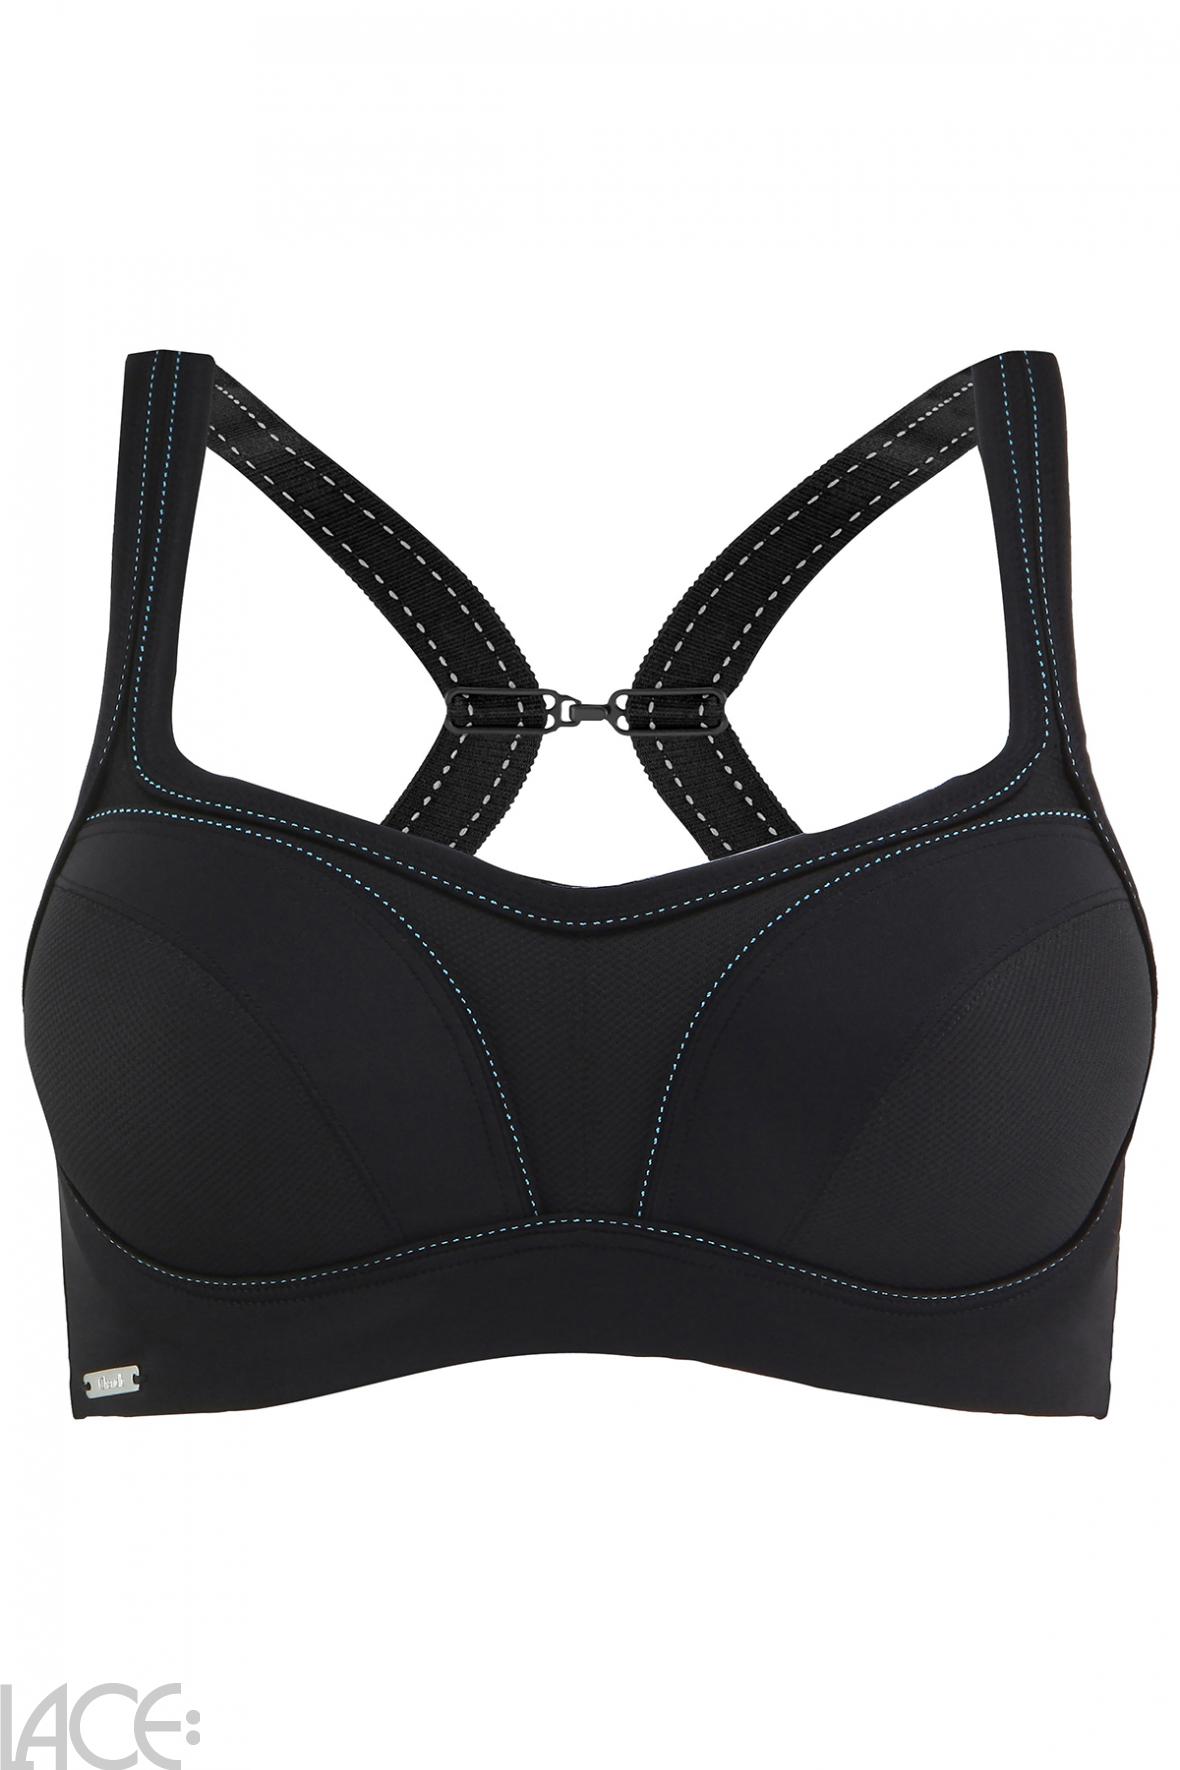 Chantelle Speciality Underwired Sports bra D-H cup – Lace-Lingerie.com